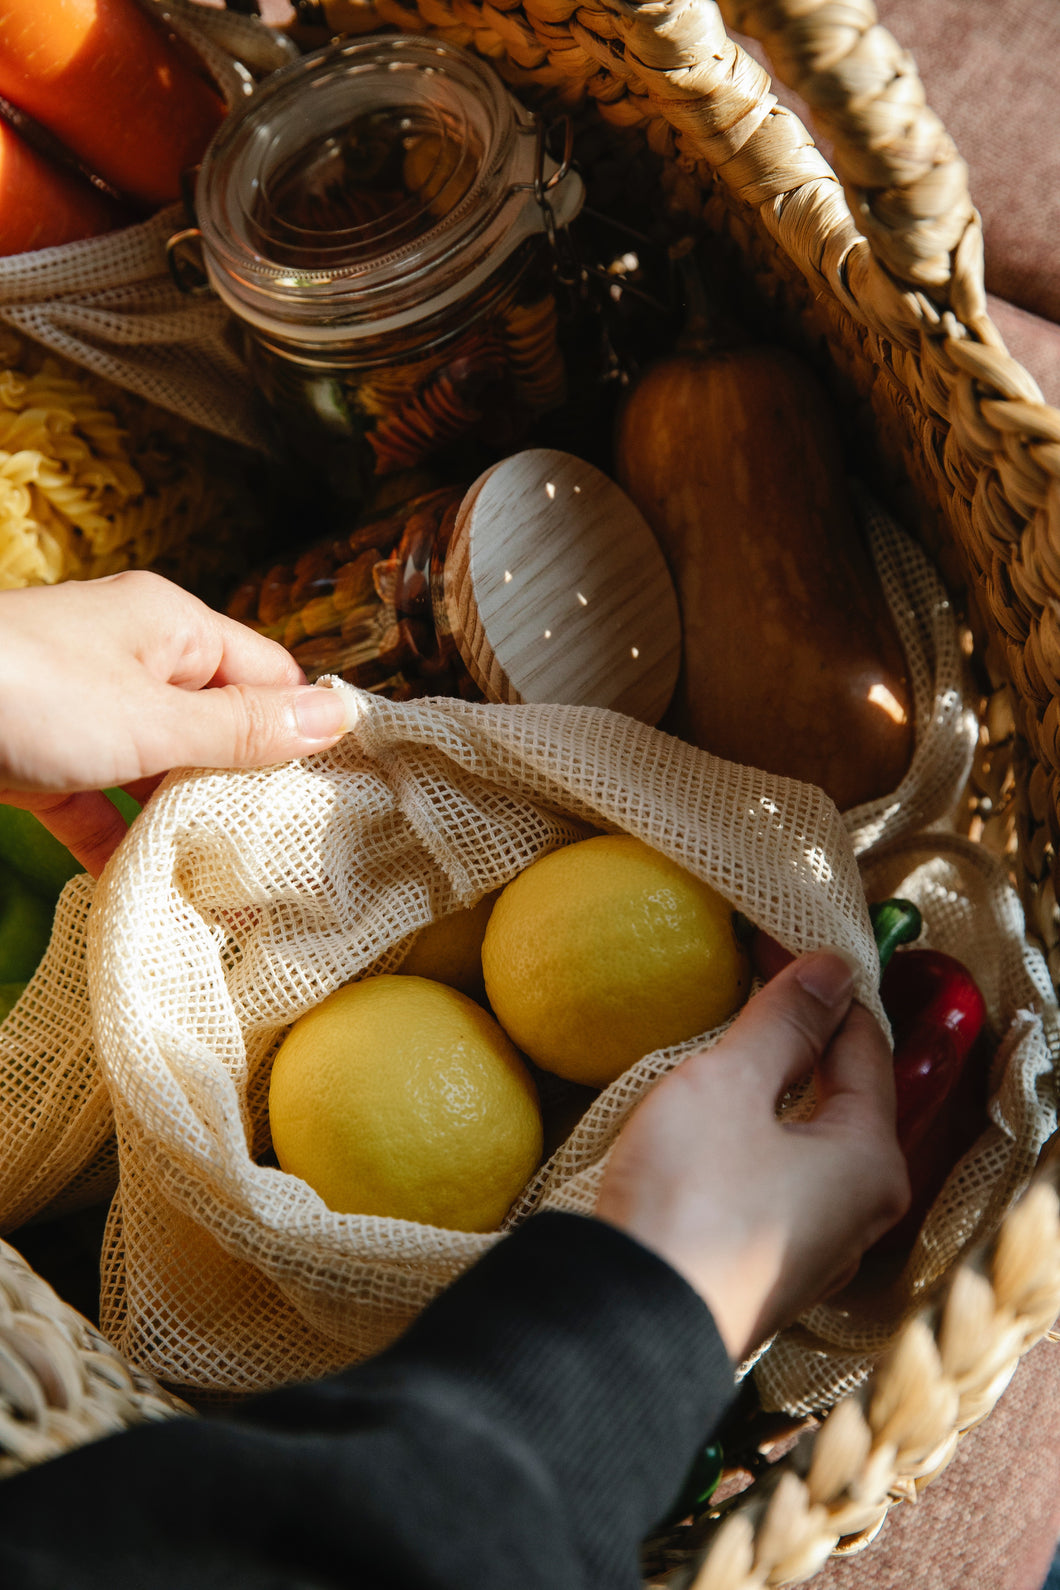 Cotton produce bags with fruit inside, within a basket of various jars and market items, with hands reaching inside the basket